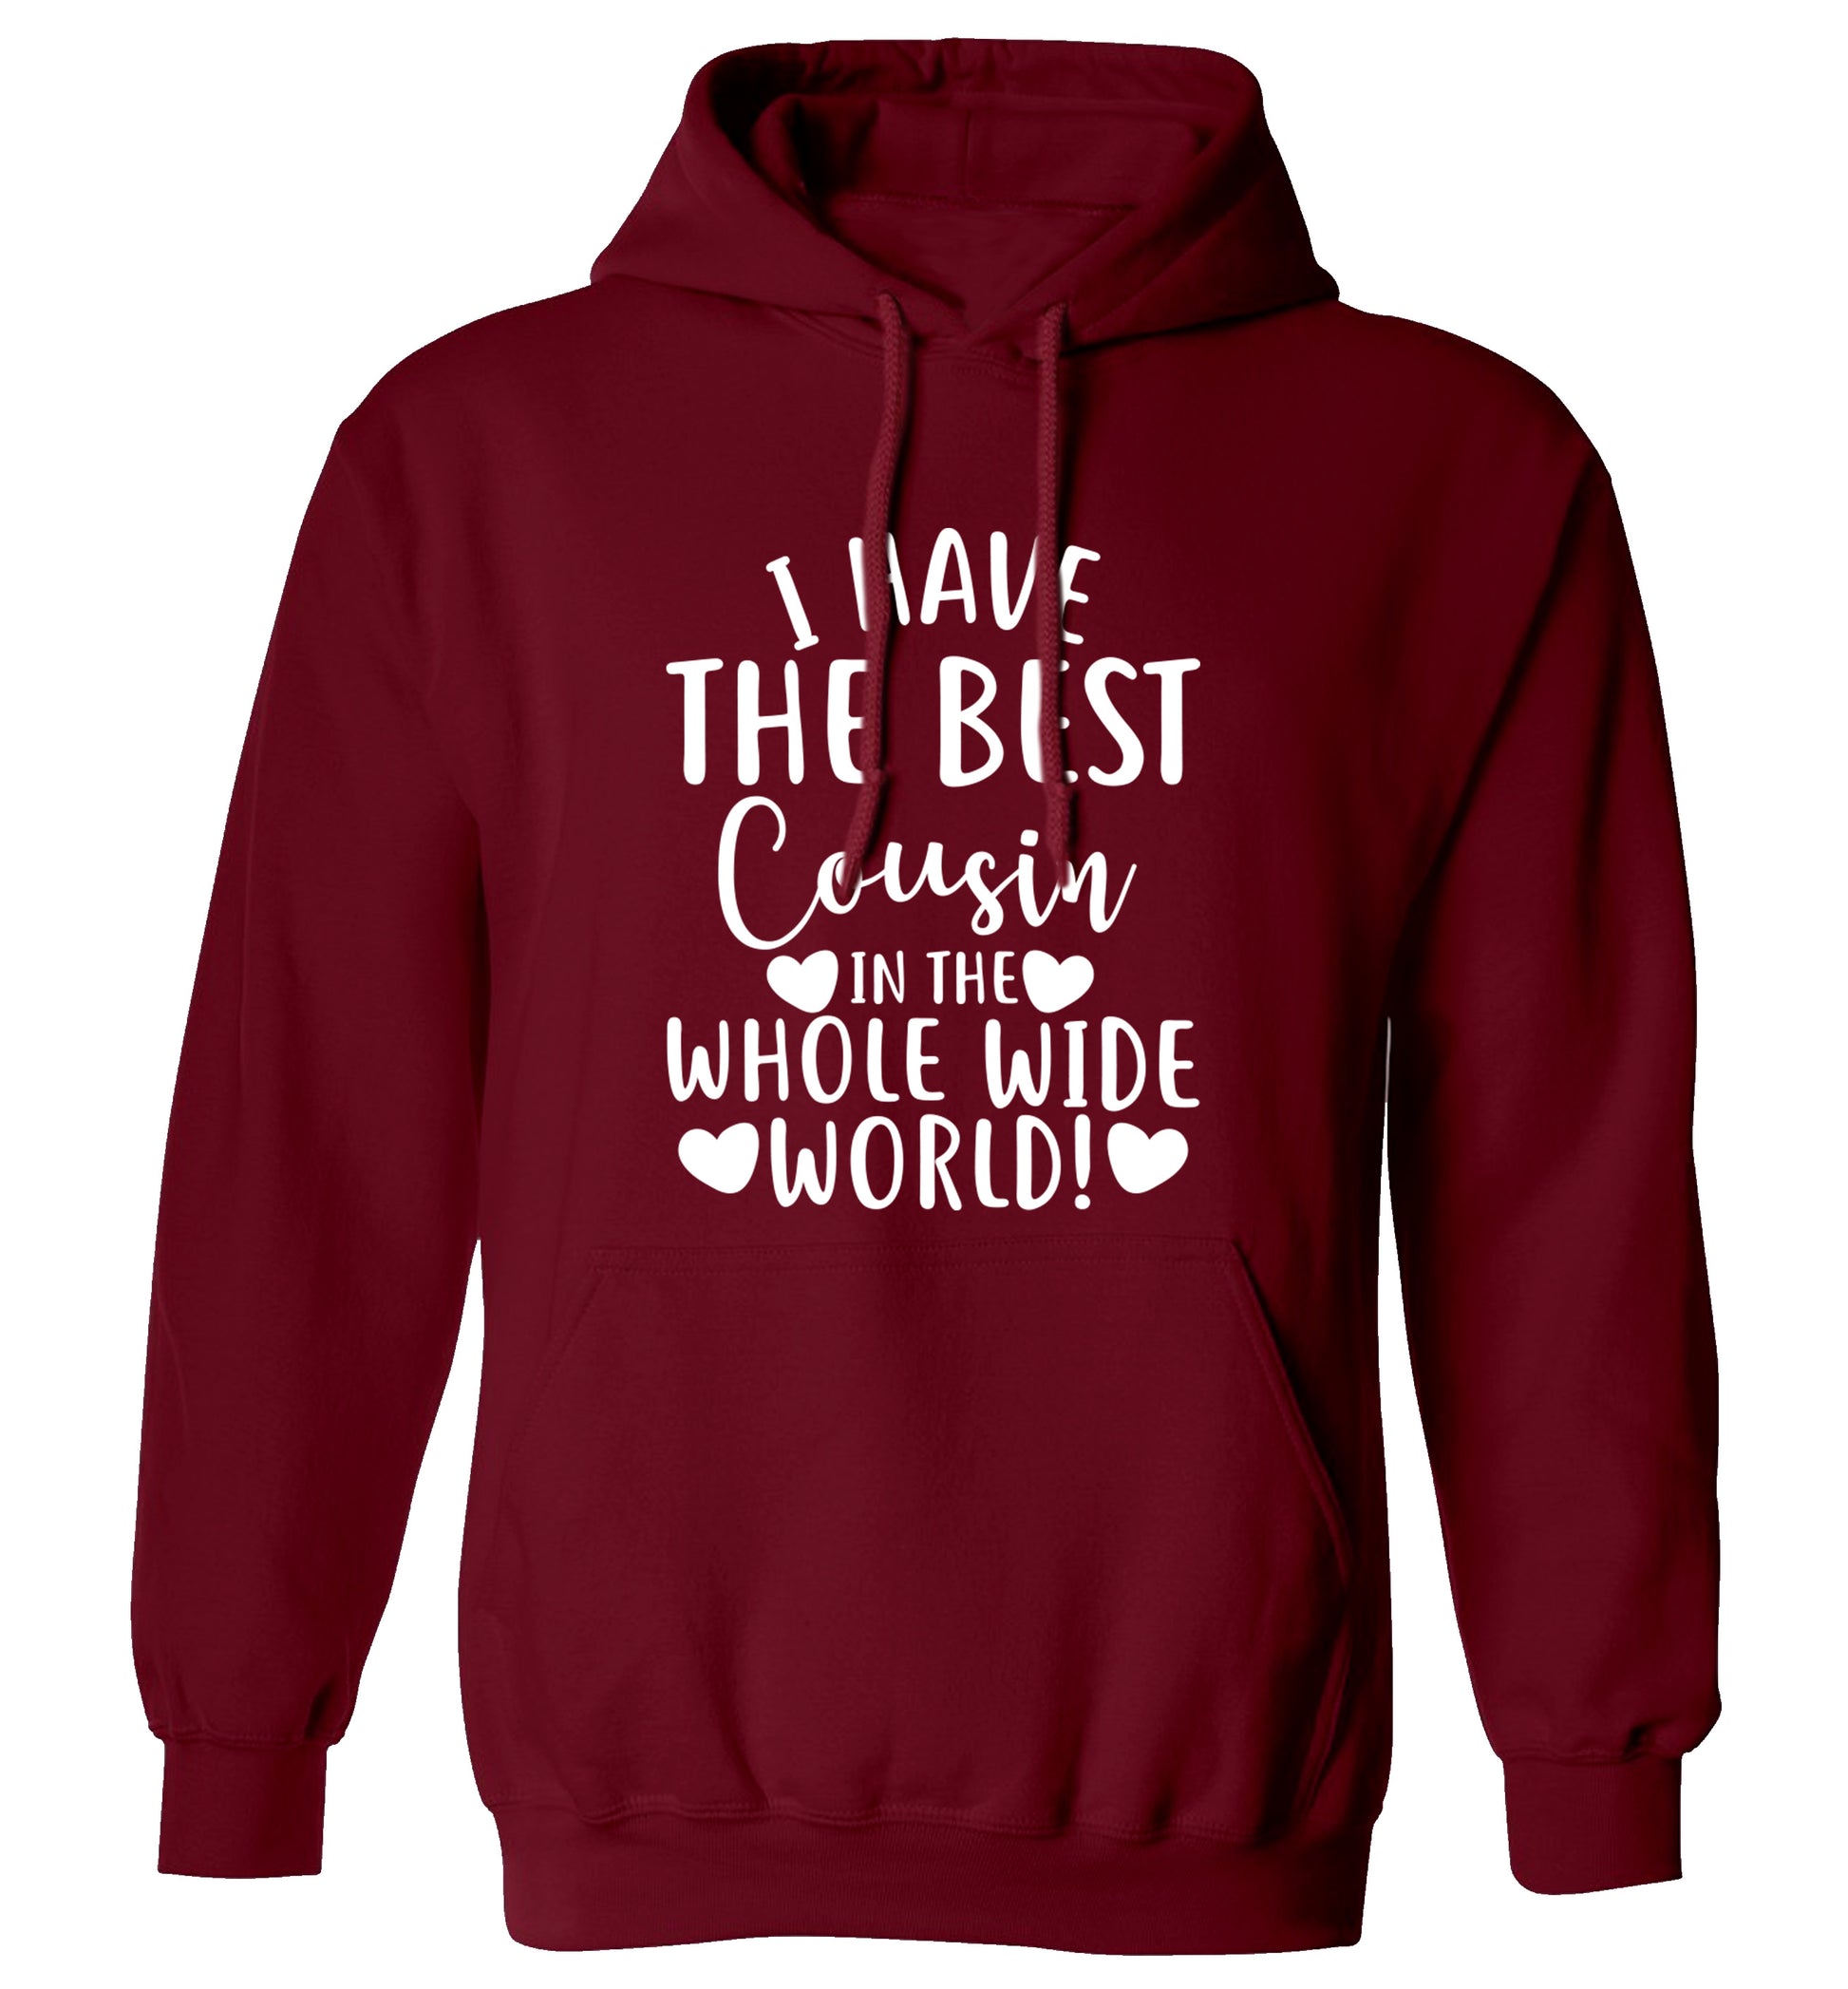 I have the best cousin in the whole wide world! adults unisex maroon hoodie 2XL